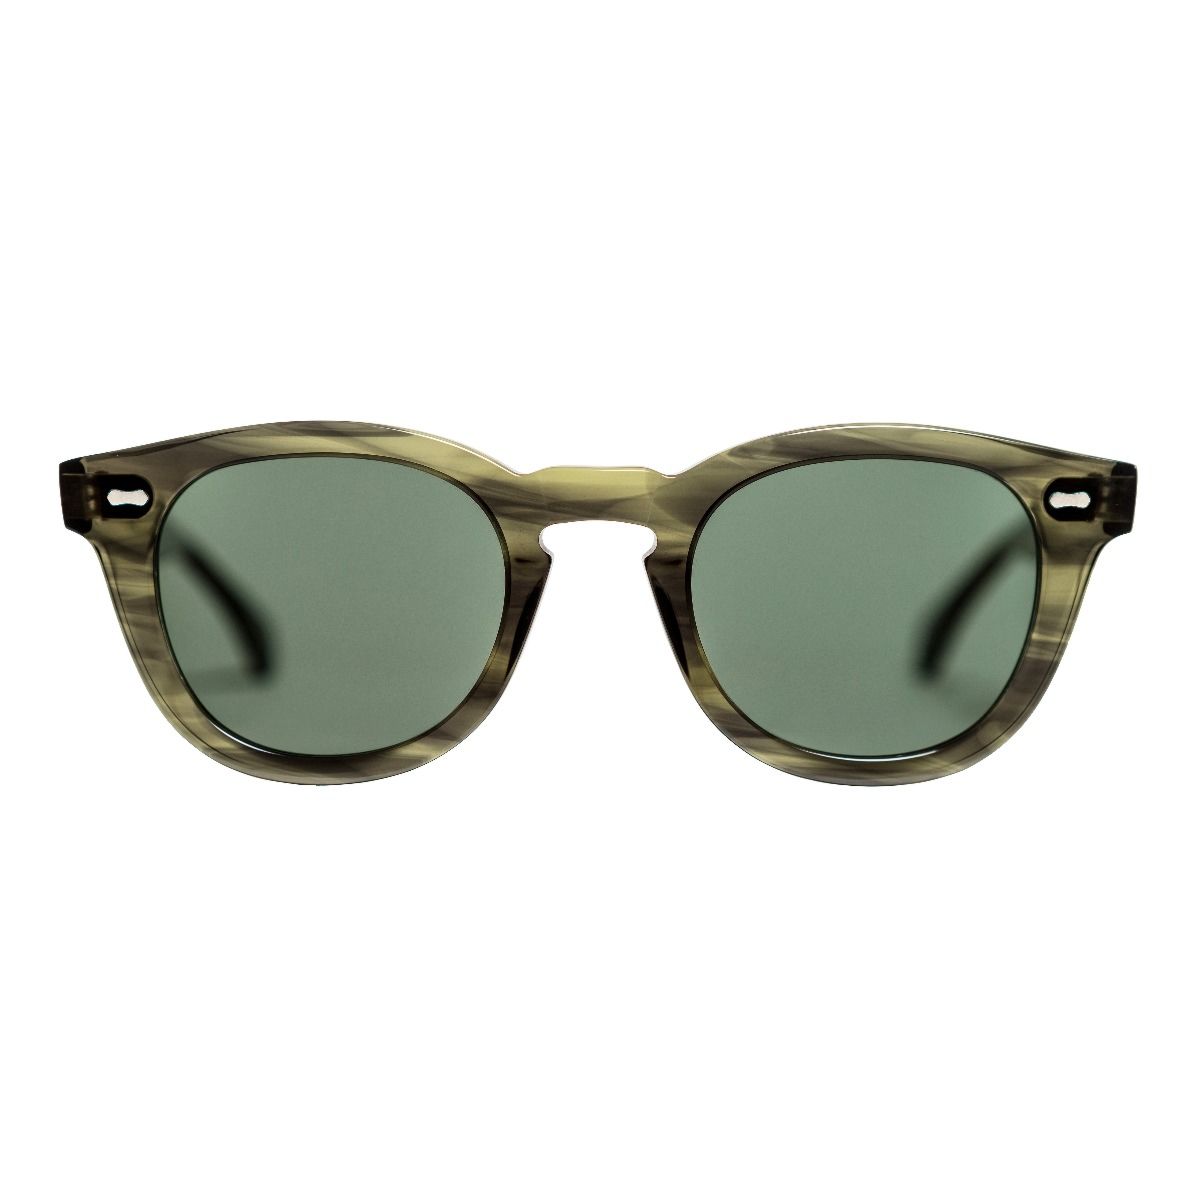 Donegal Eco Green / Bottle Green - TBD Eyewear - Made in Italy